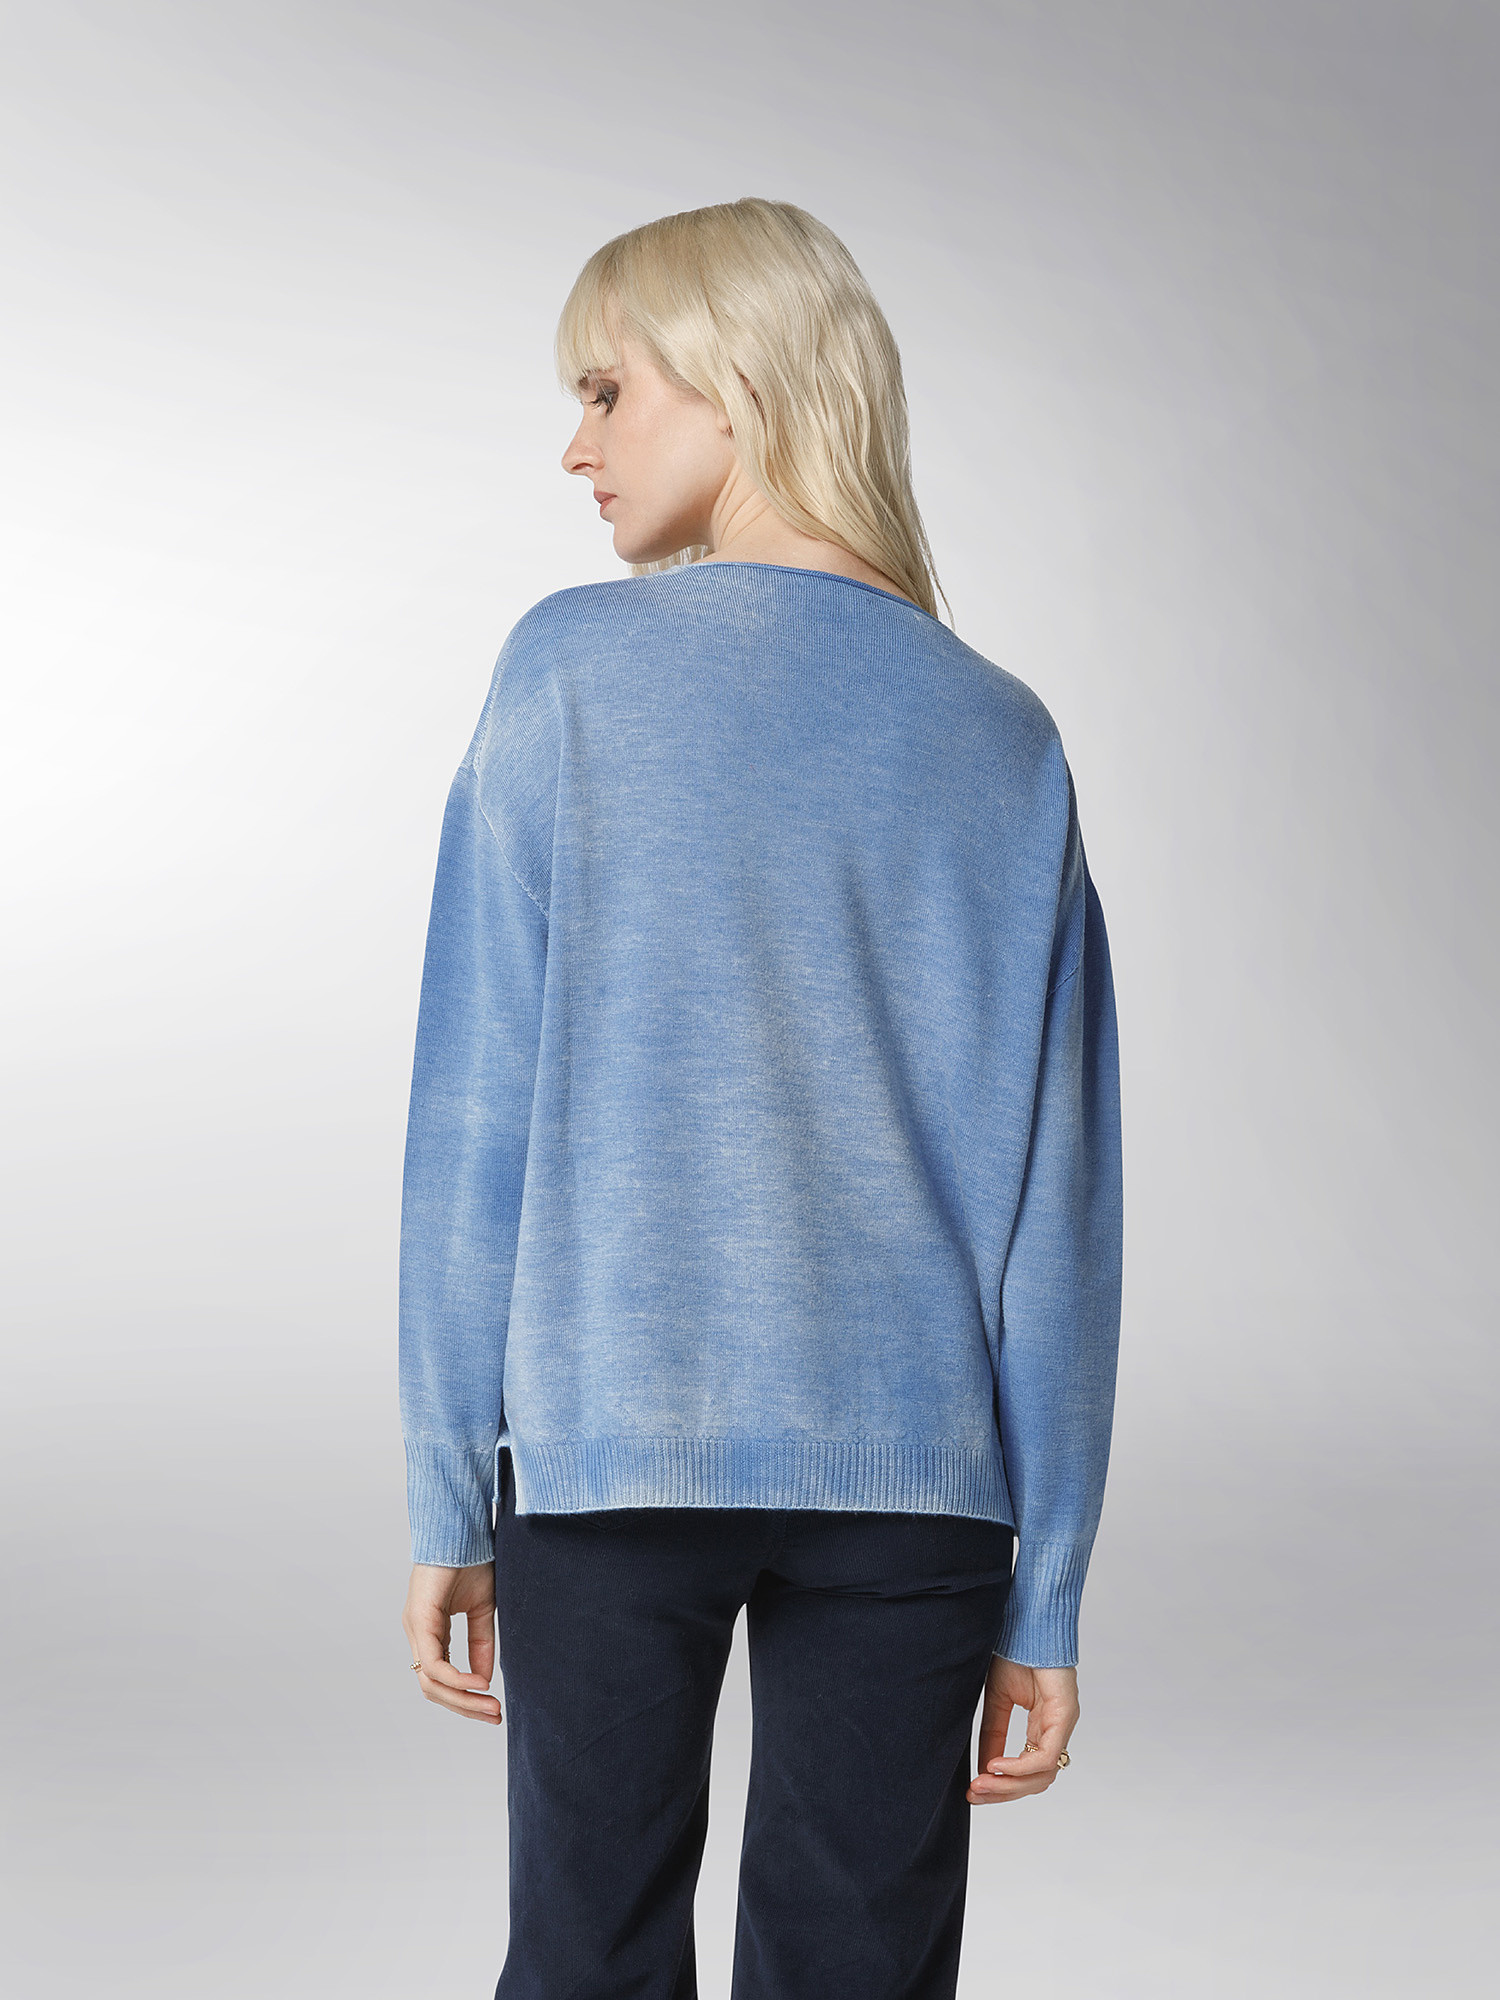 K Collection - V-neck sweater in extrafine wool, Blue, large image number 4